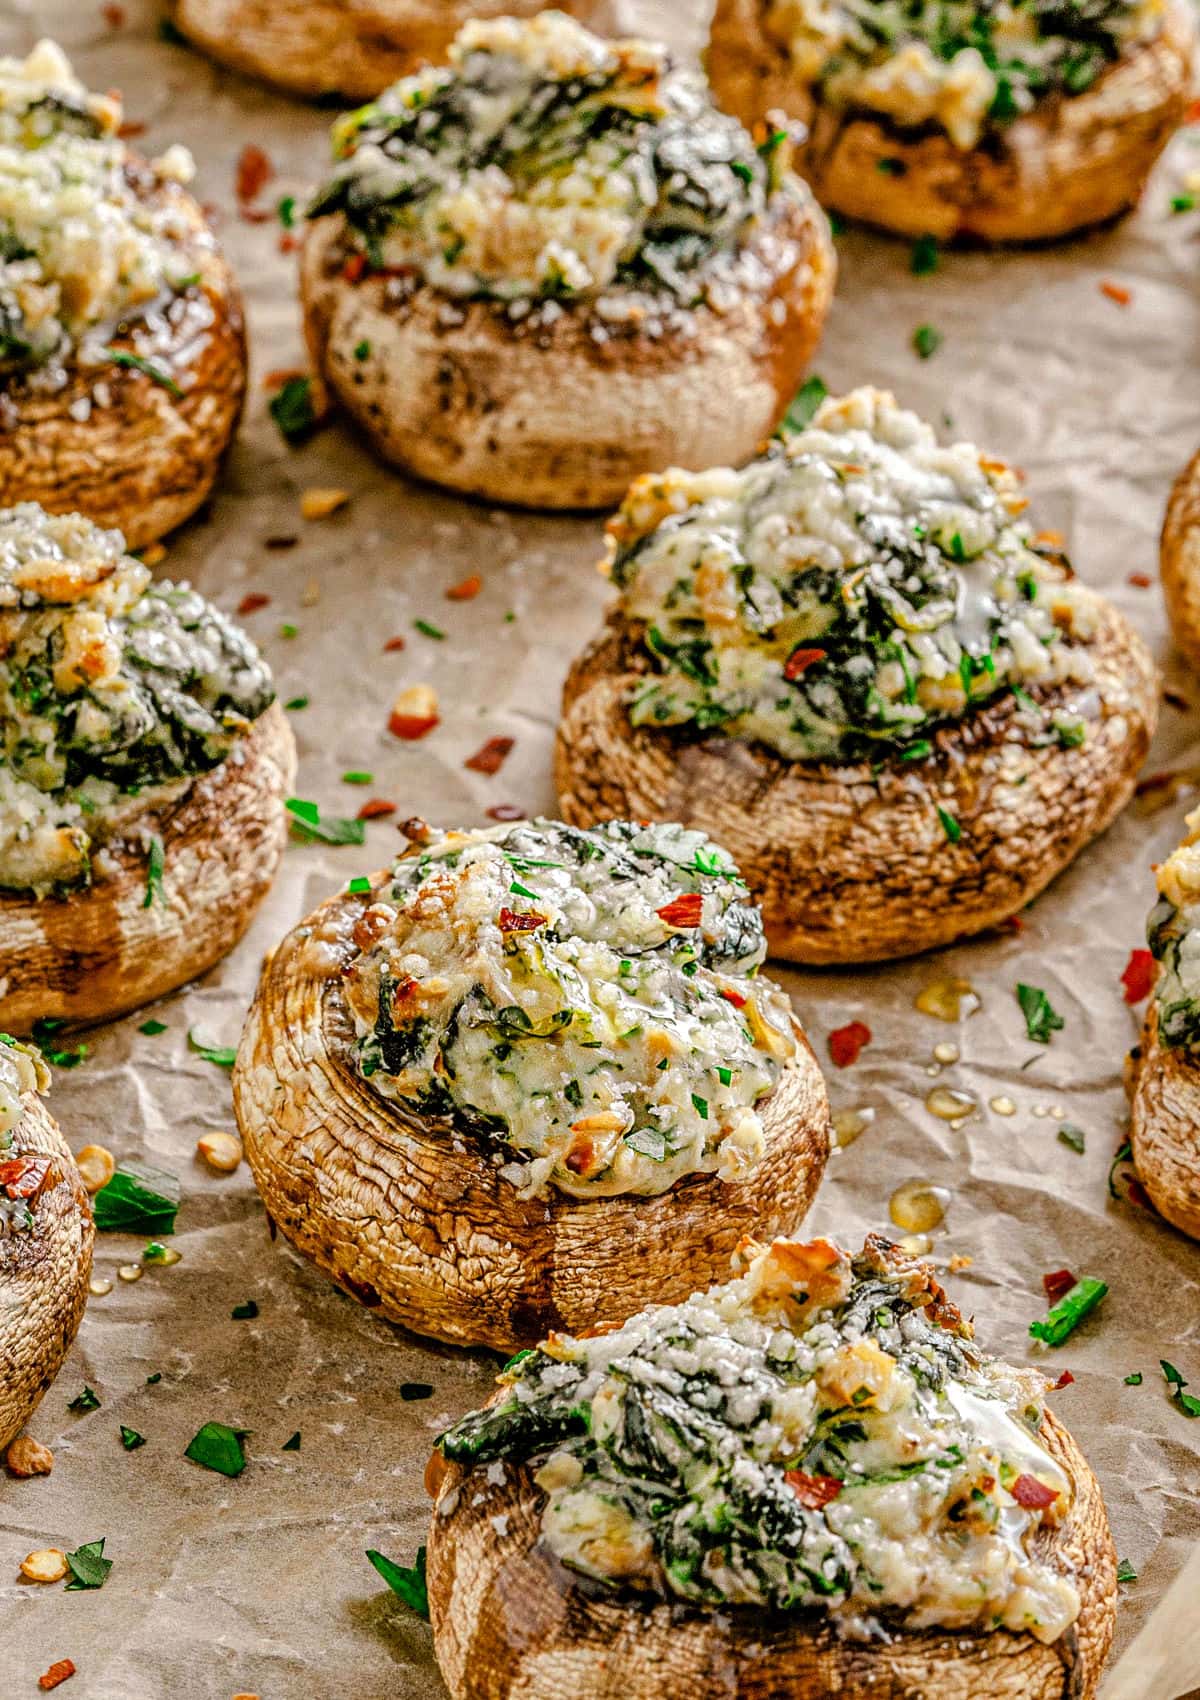 stuffed mushrooms made with spinach and cream cheese on brown parchment paper ready to enjoy.